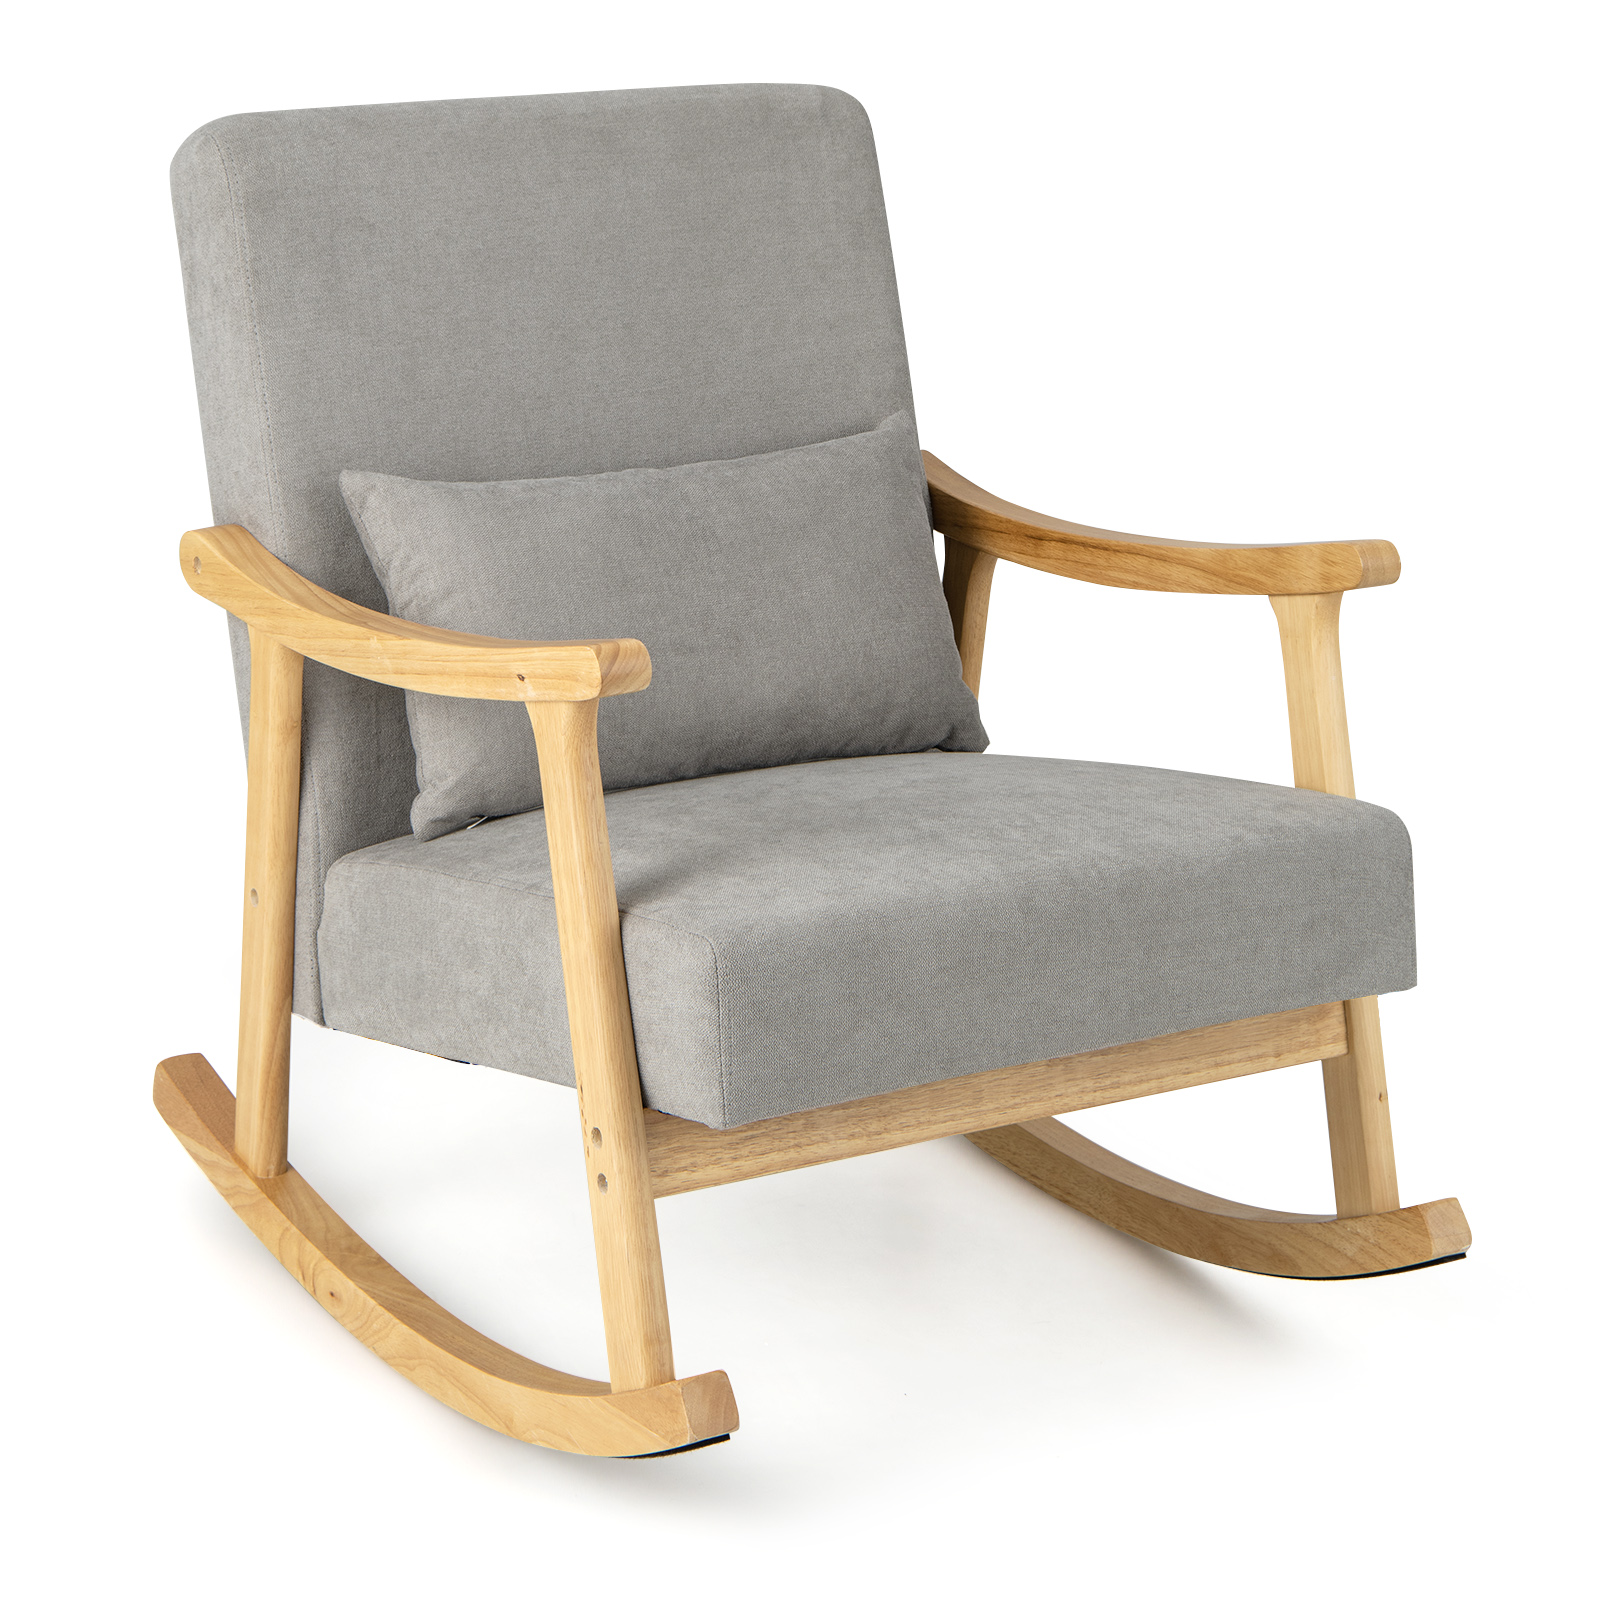 Nursery_Rocking_Accent_Chair_Rocker_Armchair_with_Rubber_Wood_Armrests_Natural-3.jpg